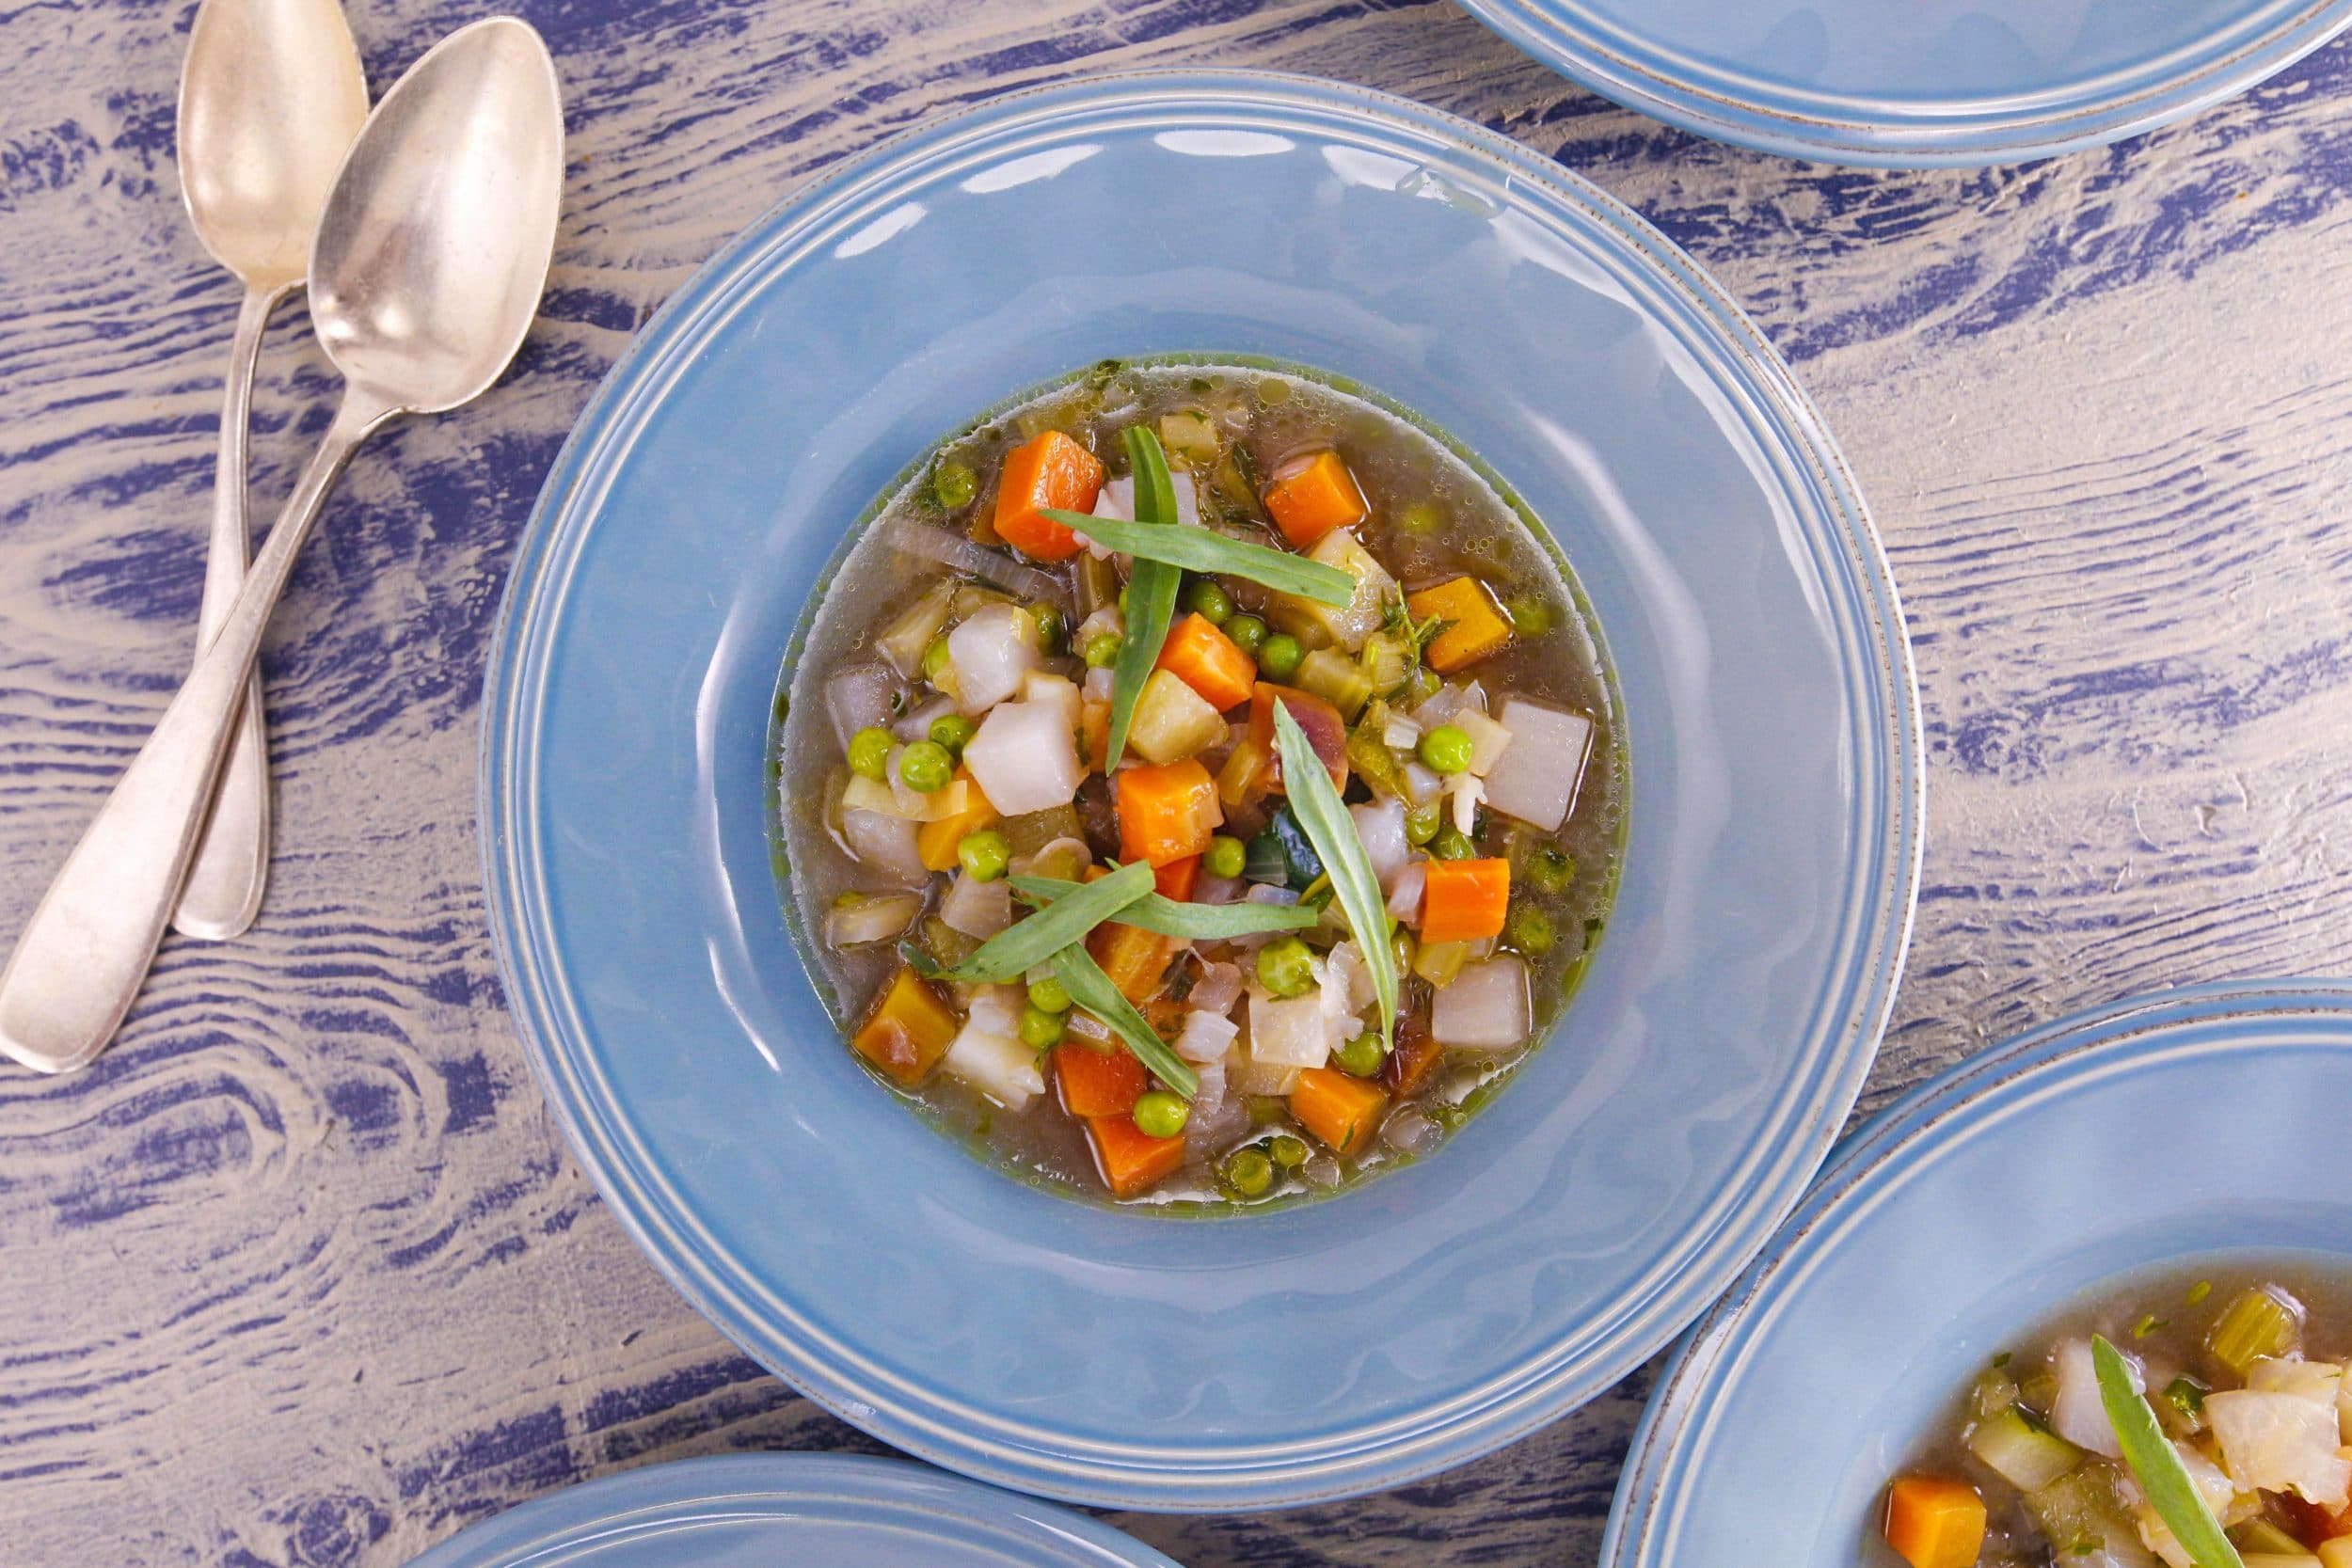 Peas and Carrots Soup